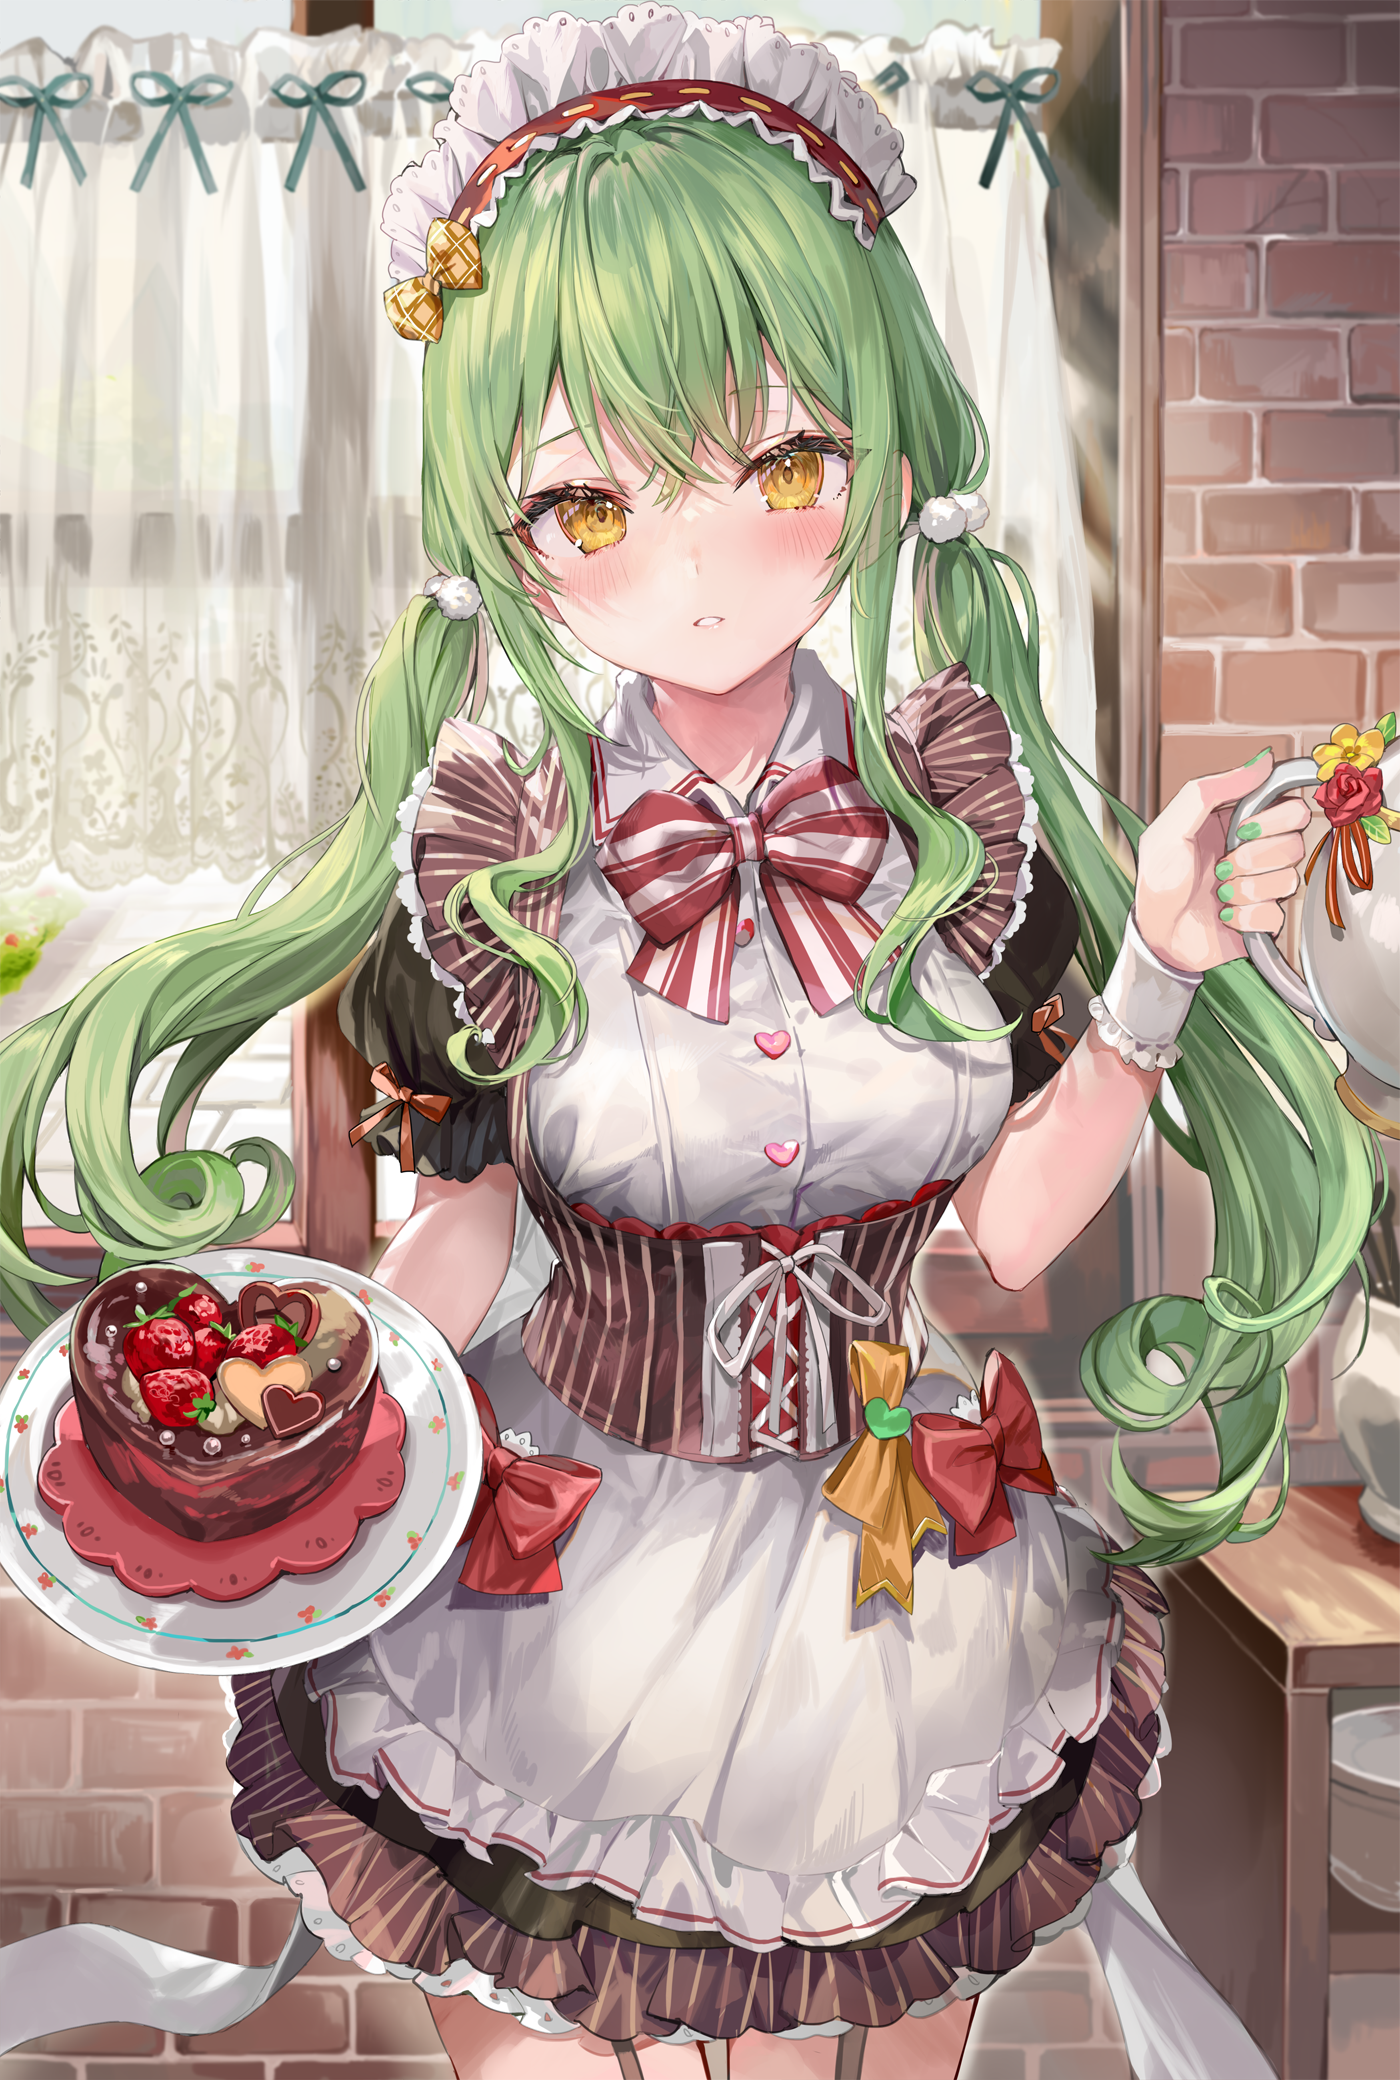 Green Hair Double Ponytail Brownie Maid Anime Maid Outfit Anime Girls Yellow Eyes 1400x2080